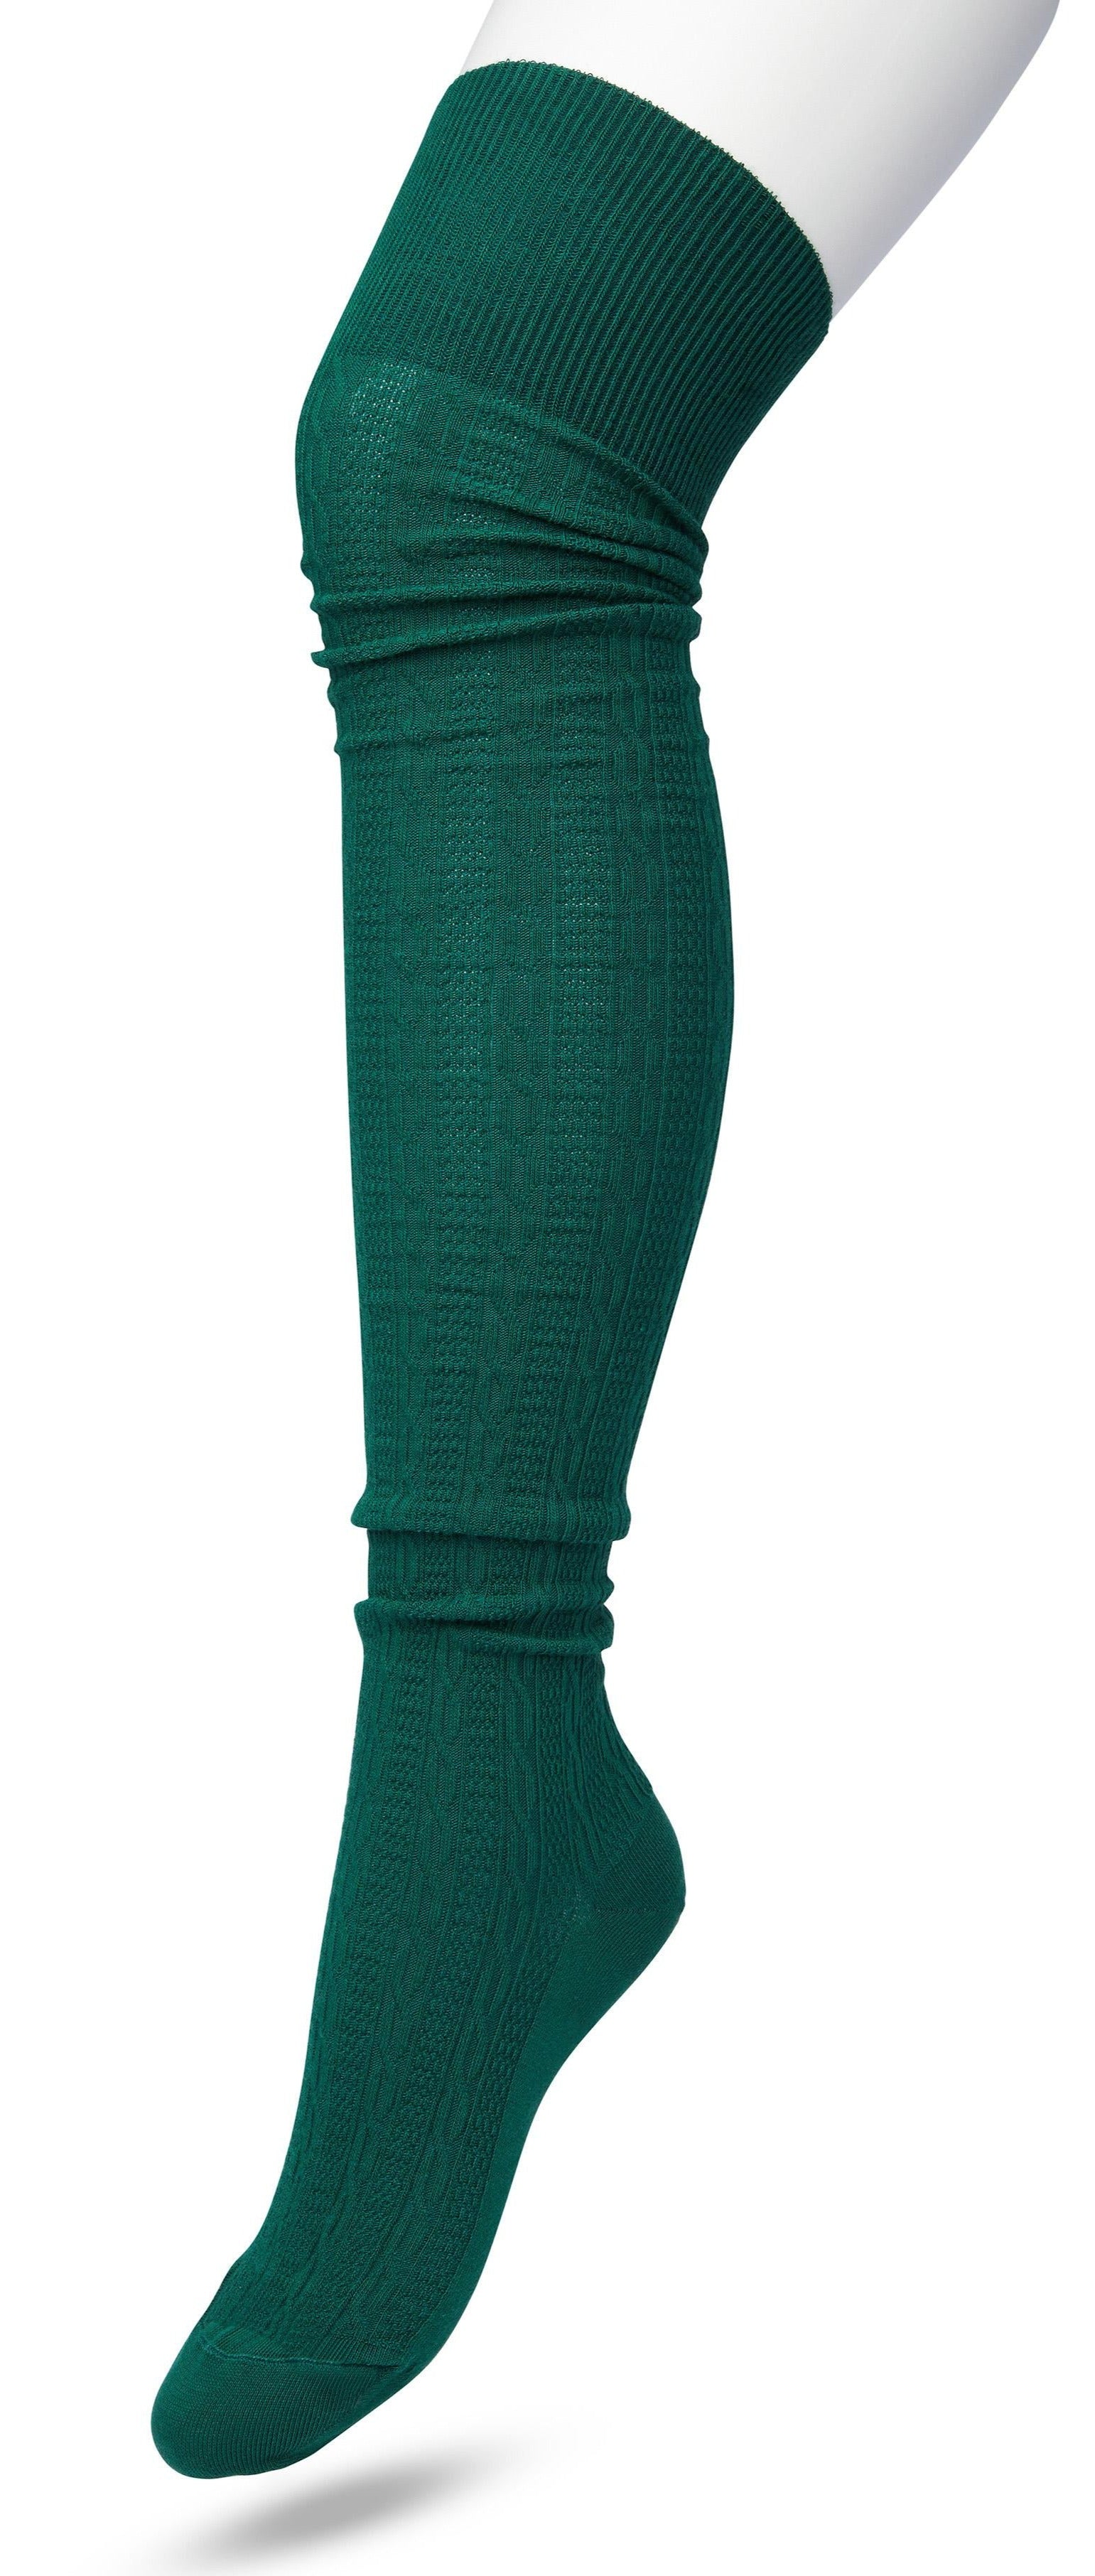 Bonnie Doon Cable Over-Knee Sock - Dark bottle green (trekking green) cotton knitted over the knee socks with a cable knit style ribbed pattern 